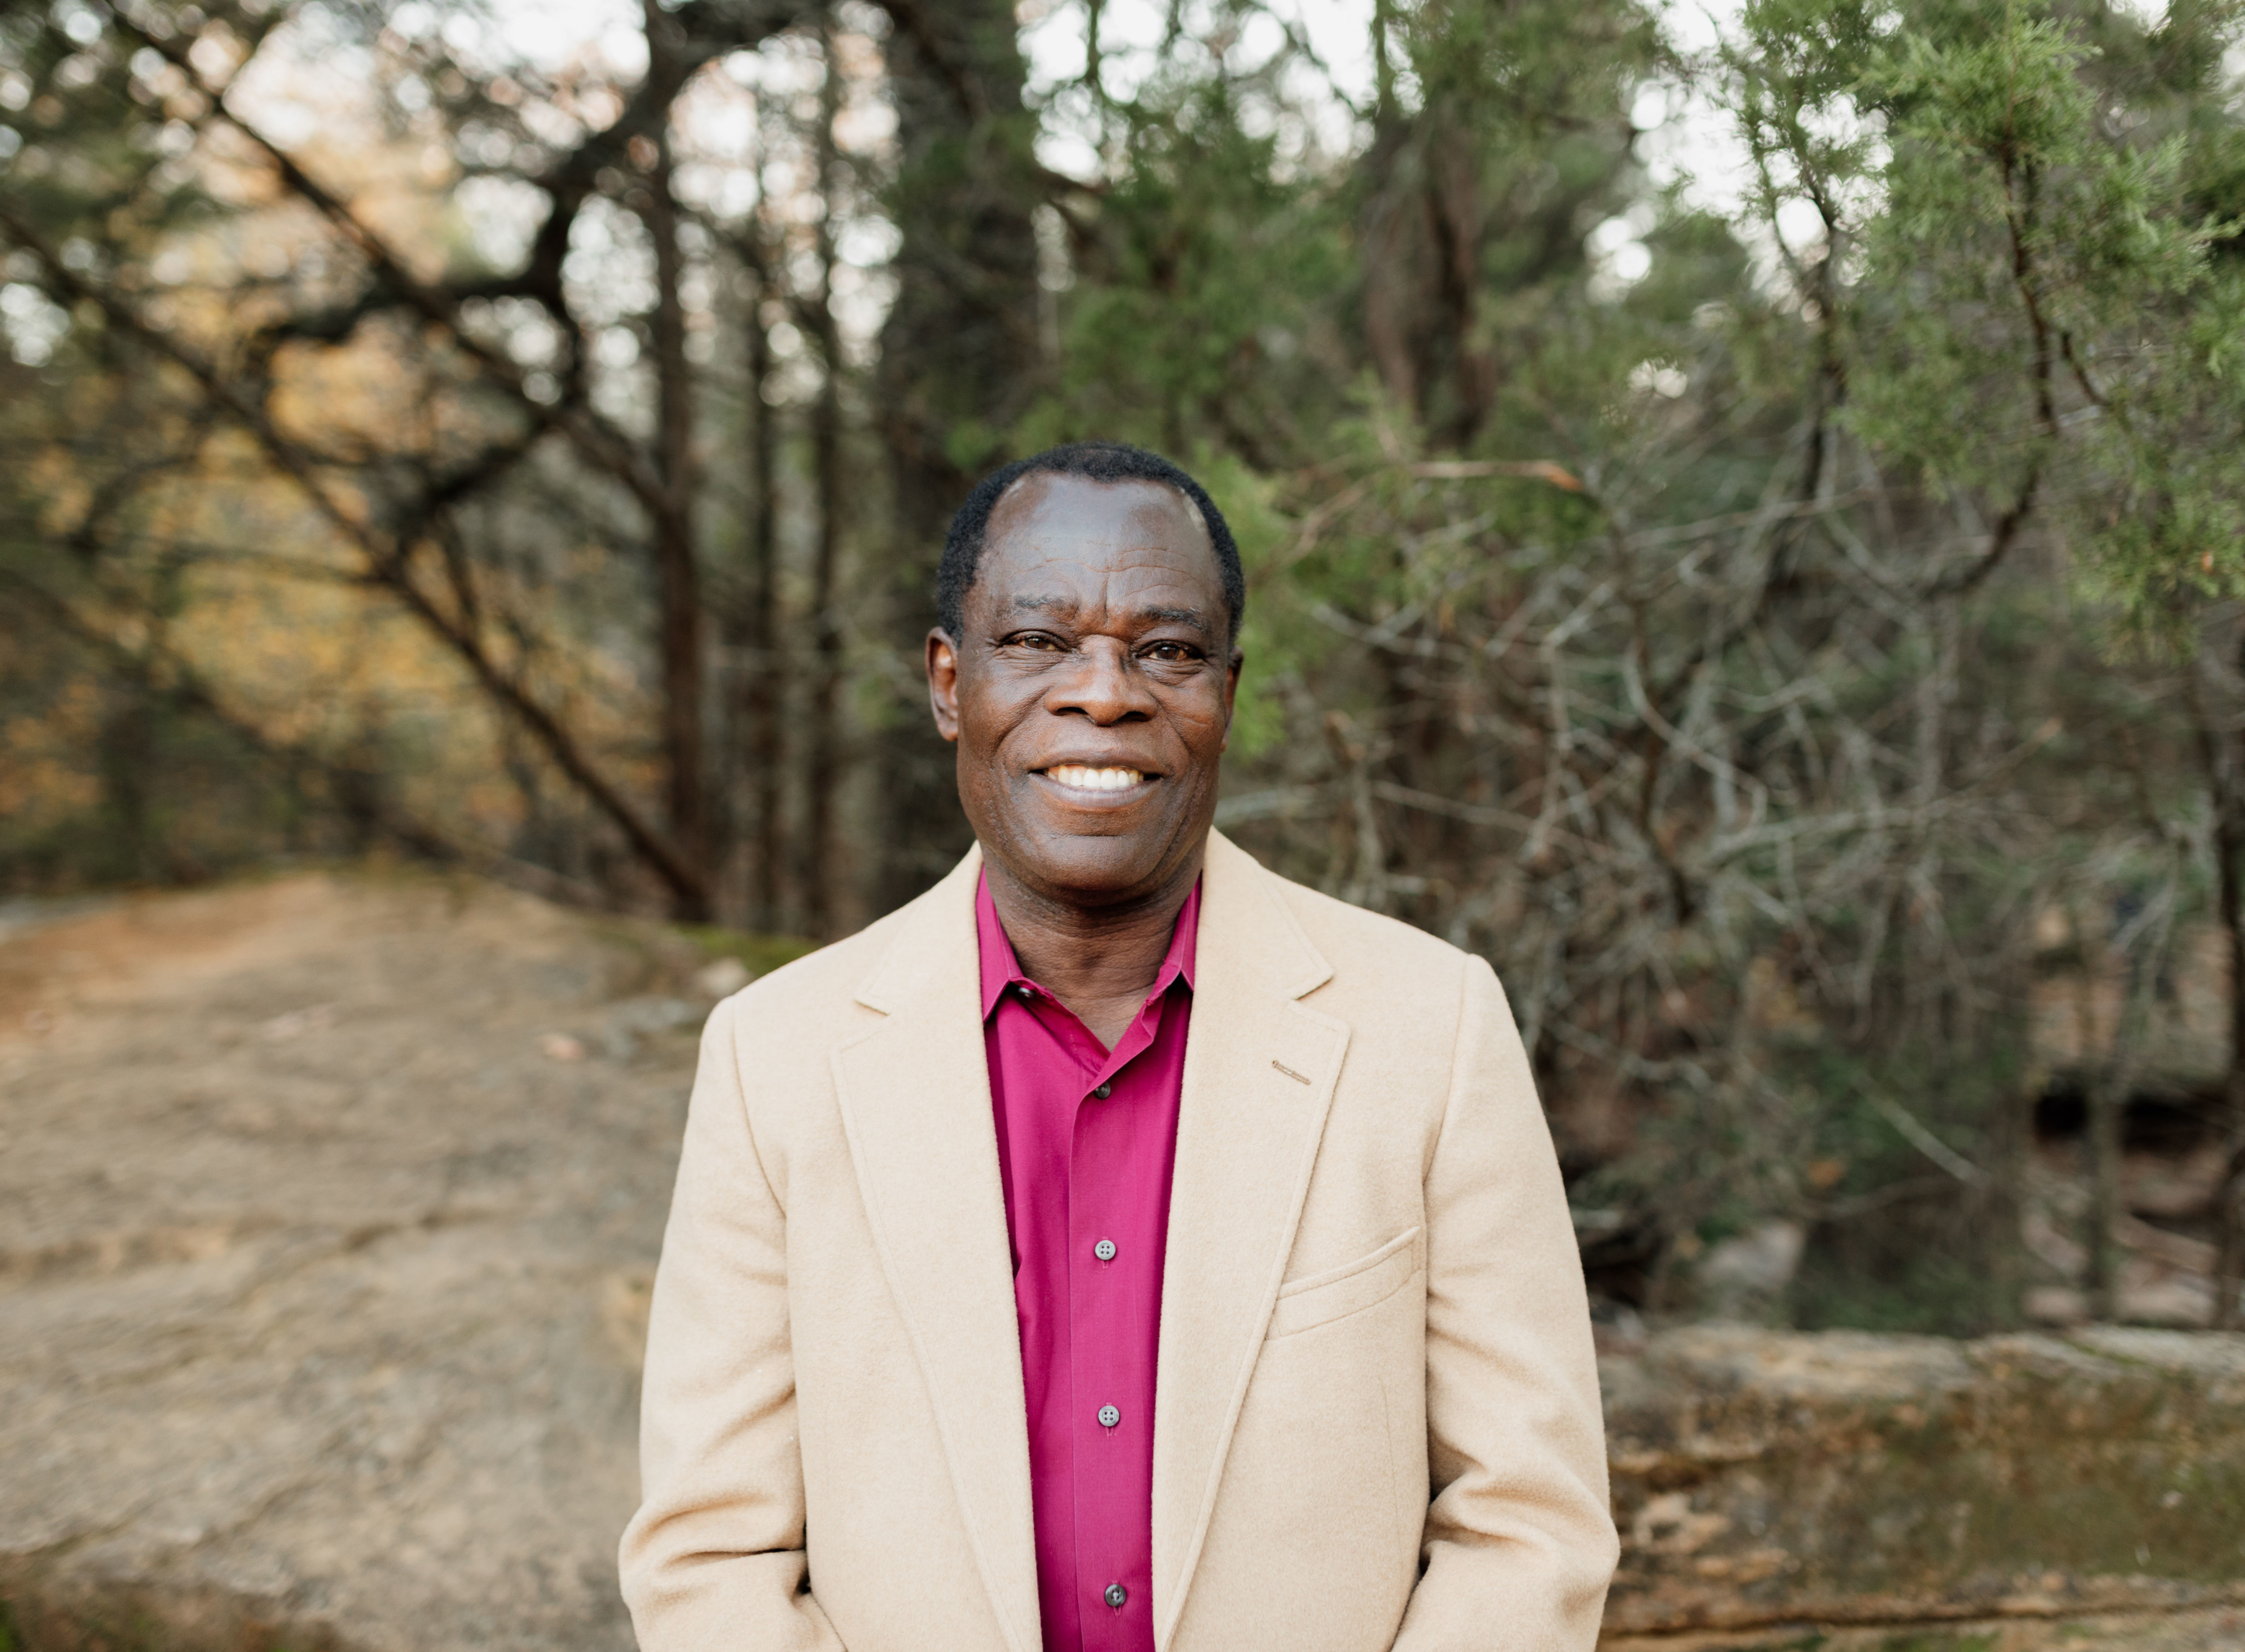 Joseph Oppong stands in a pink shirt and beige jacket in front of trees.